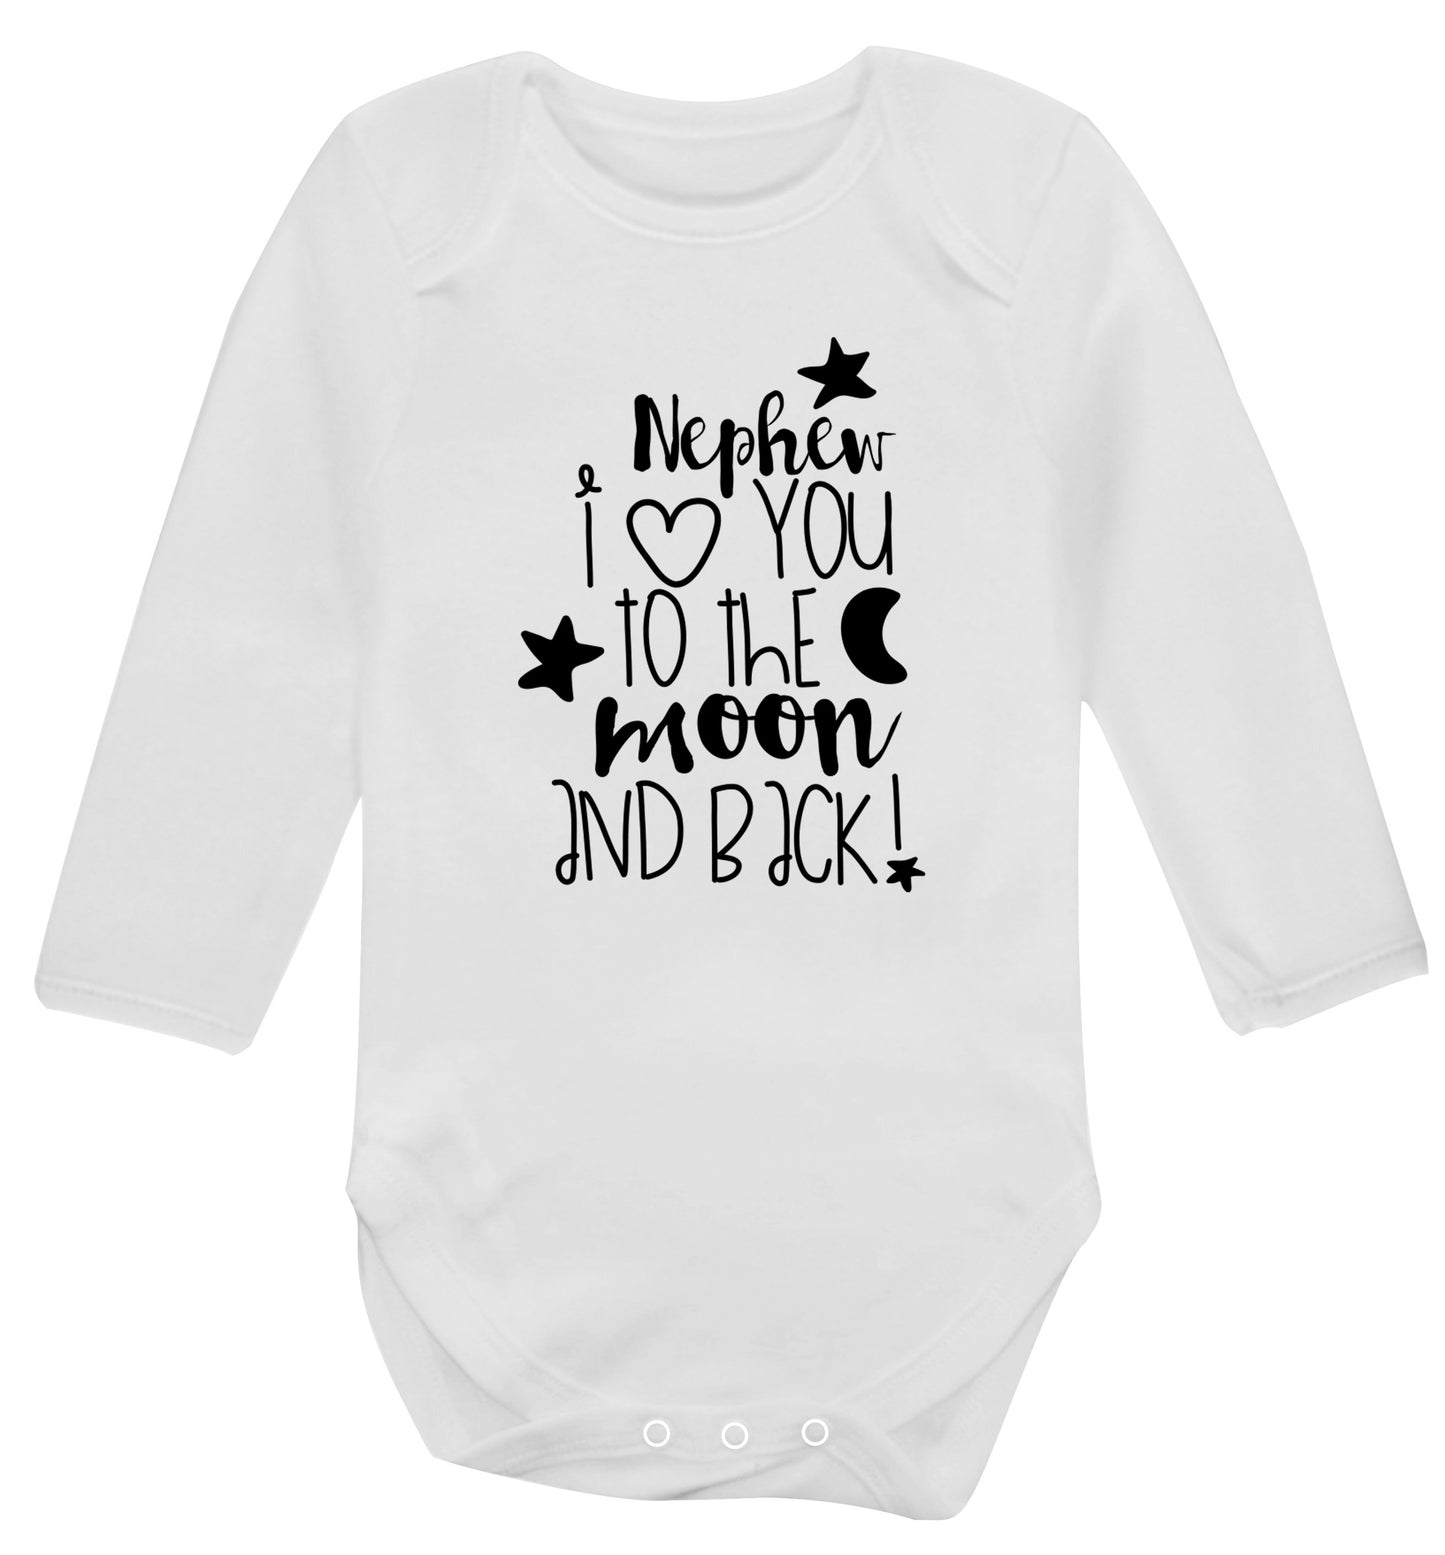 Nephew I love you to the moon and back Baby Vest long sleeved white 6-12 months